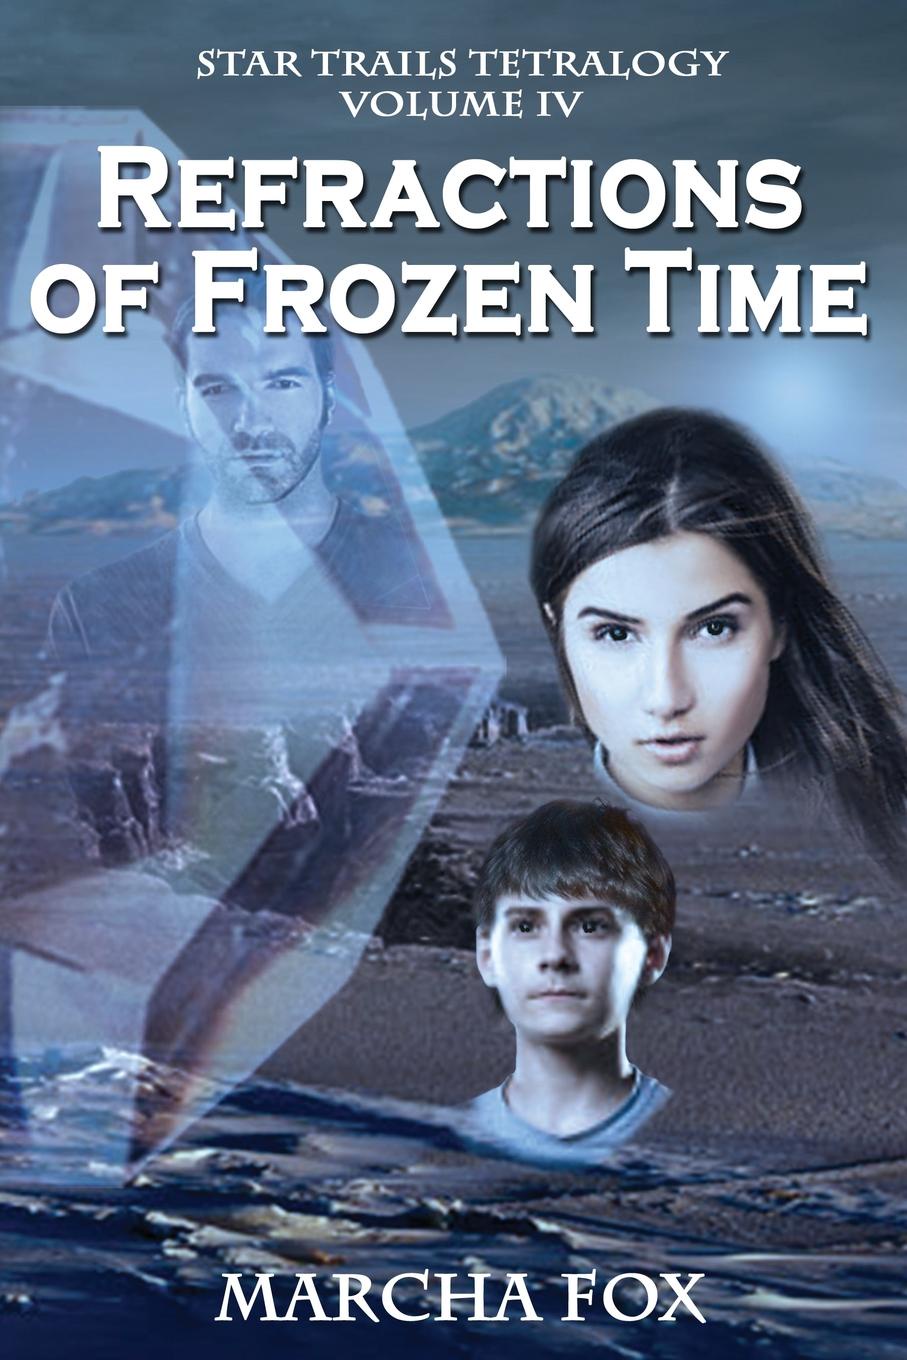 Refractions of Frozen Time